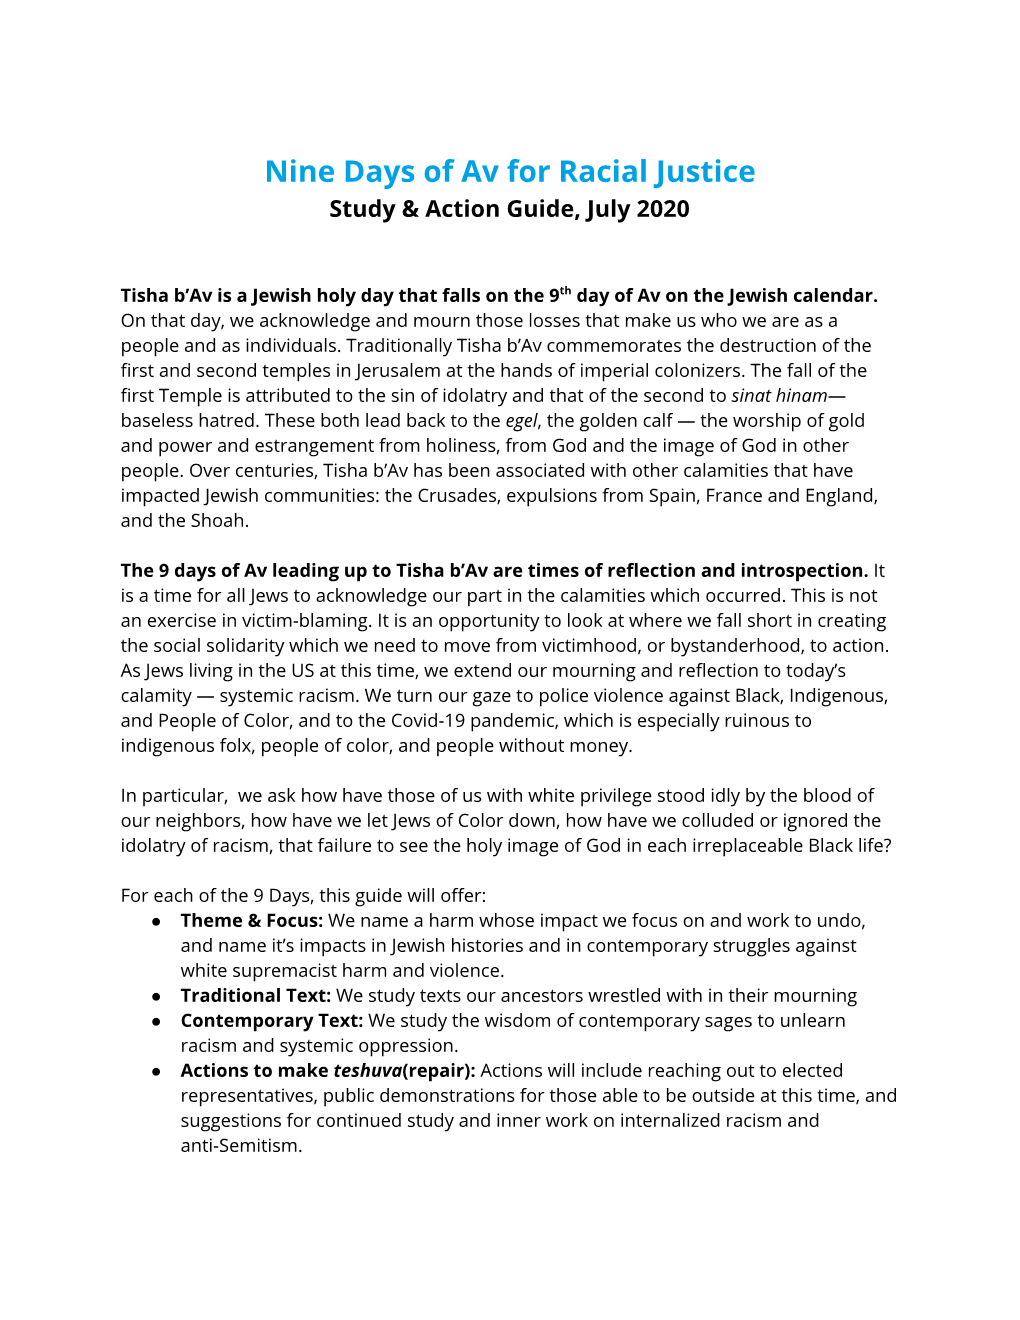 Nine Days of Av for Racial Justice Study & Action Guide, July 2020